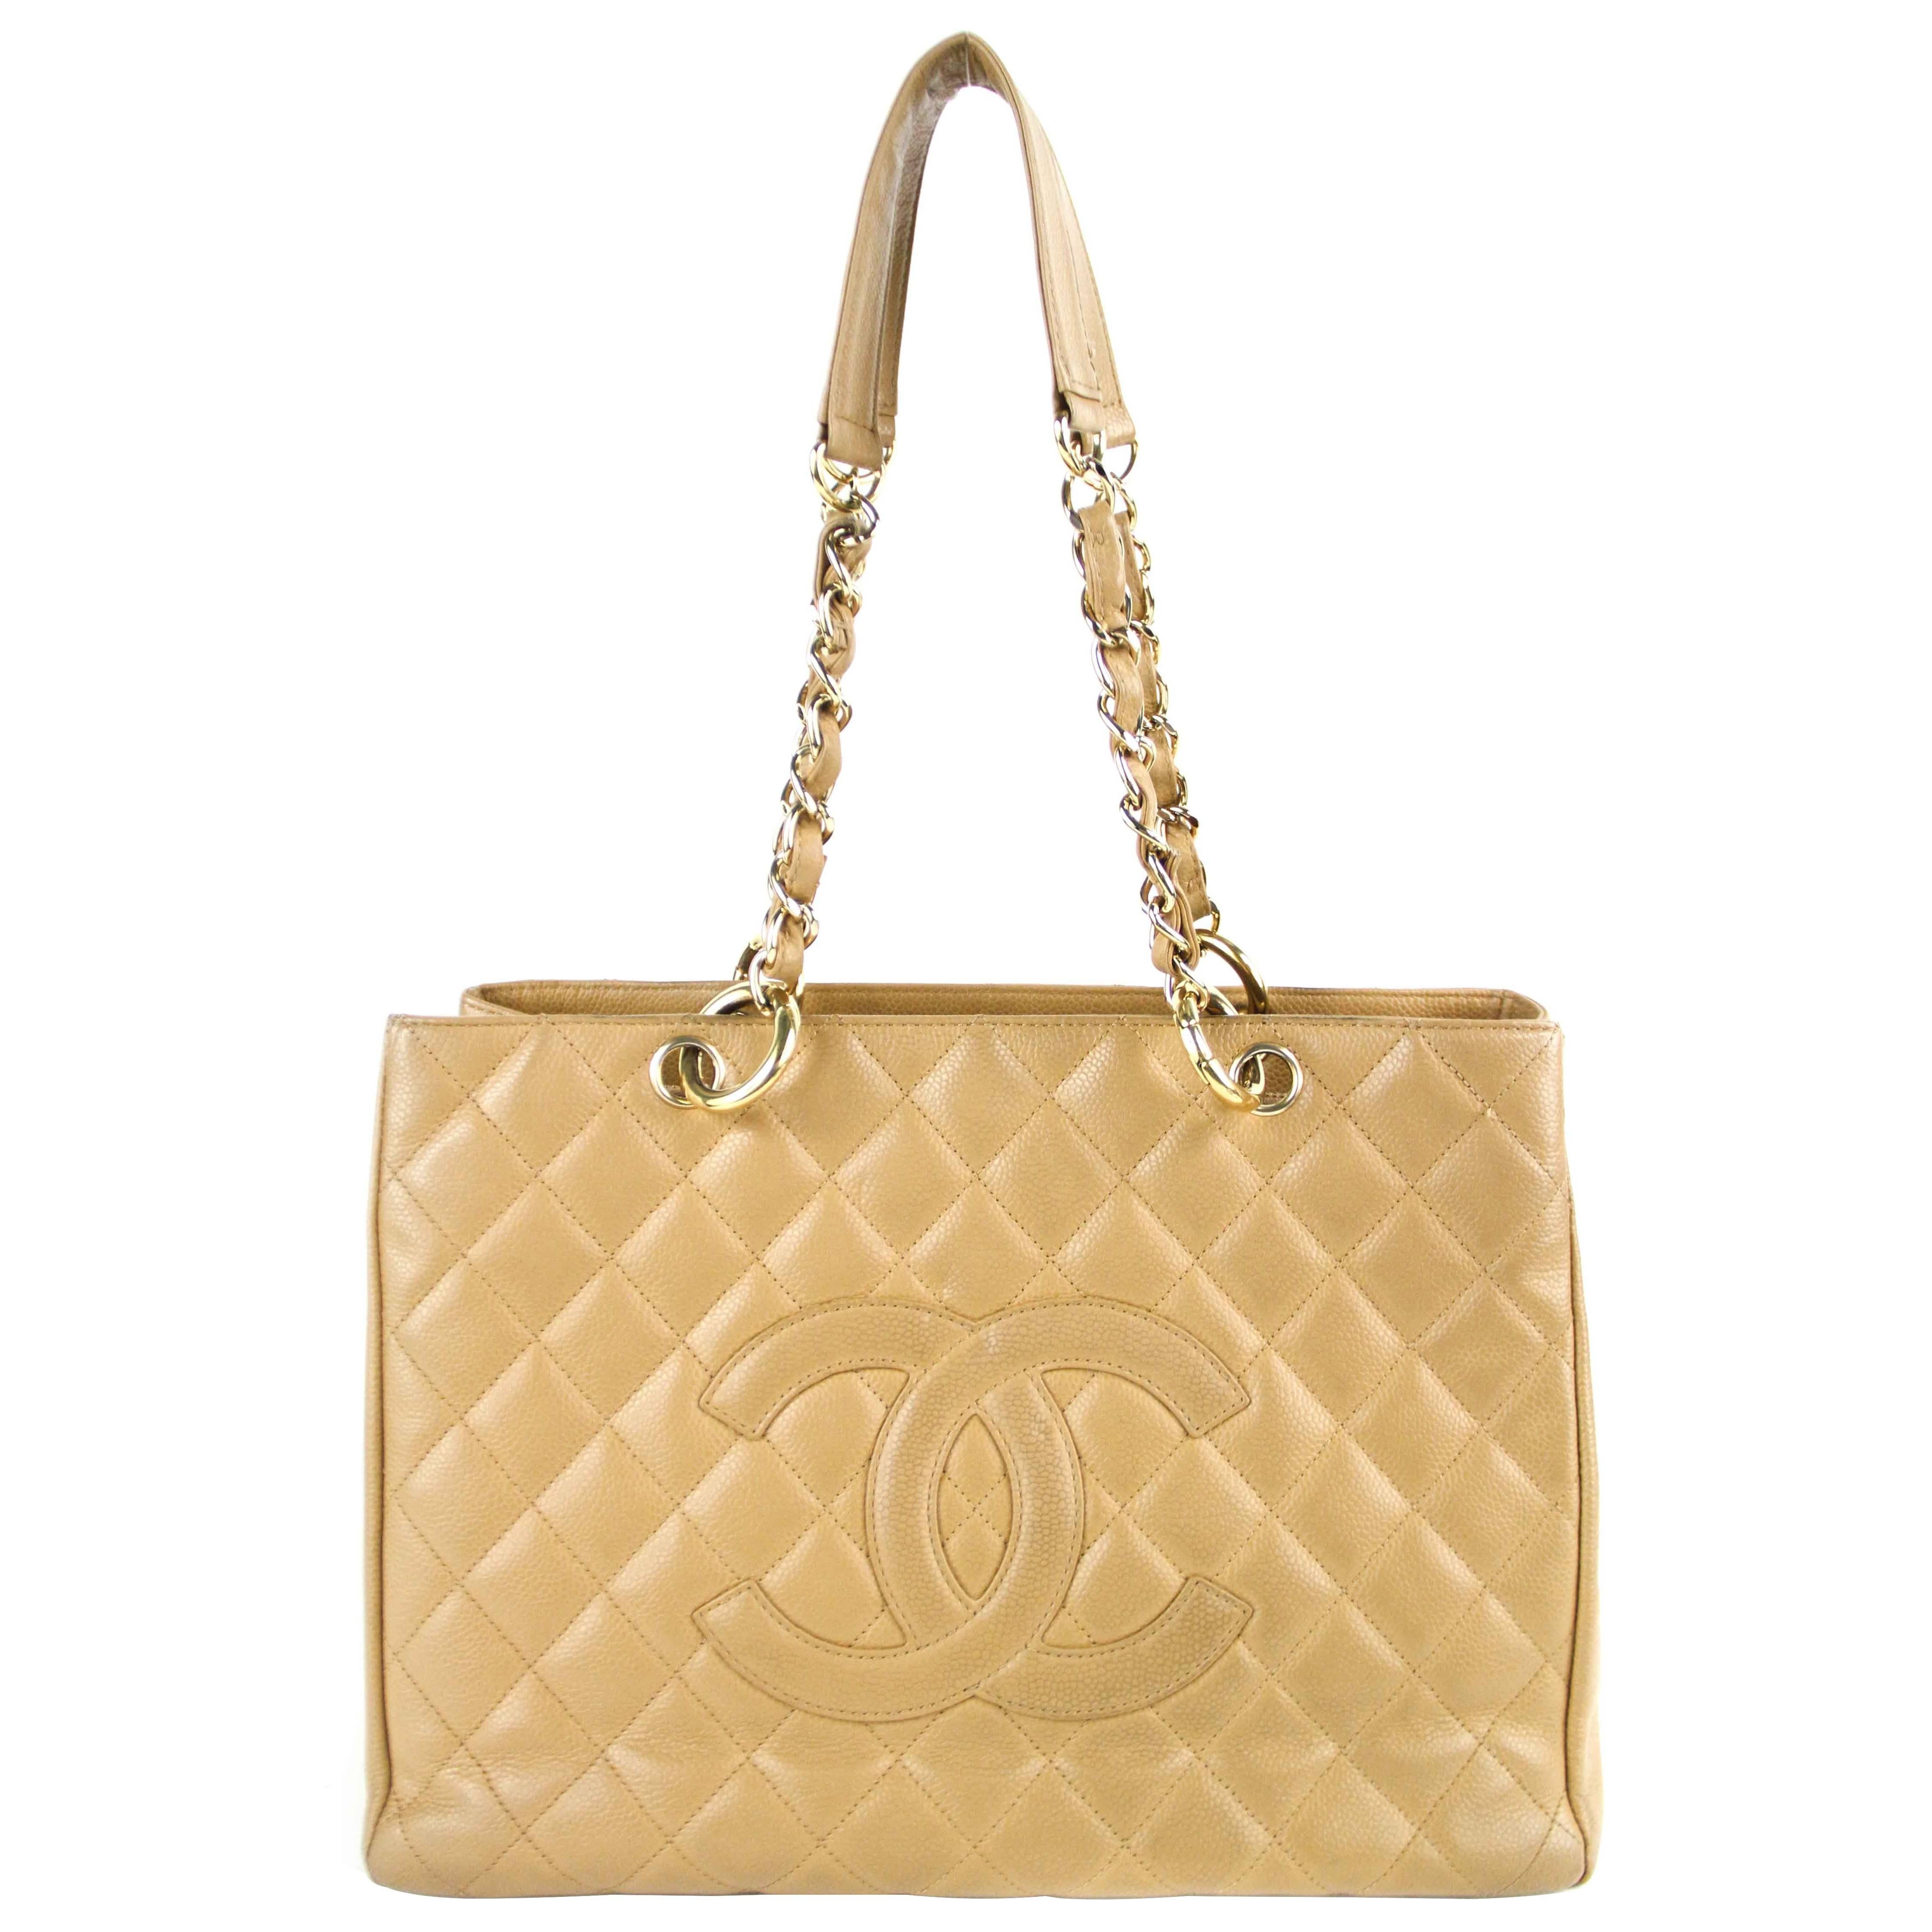 Chanel Beige Caviar Quilted Grand GST Shopping Tote 